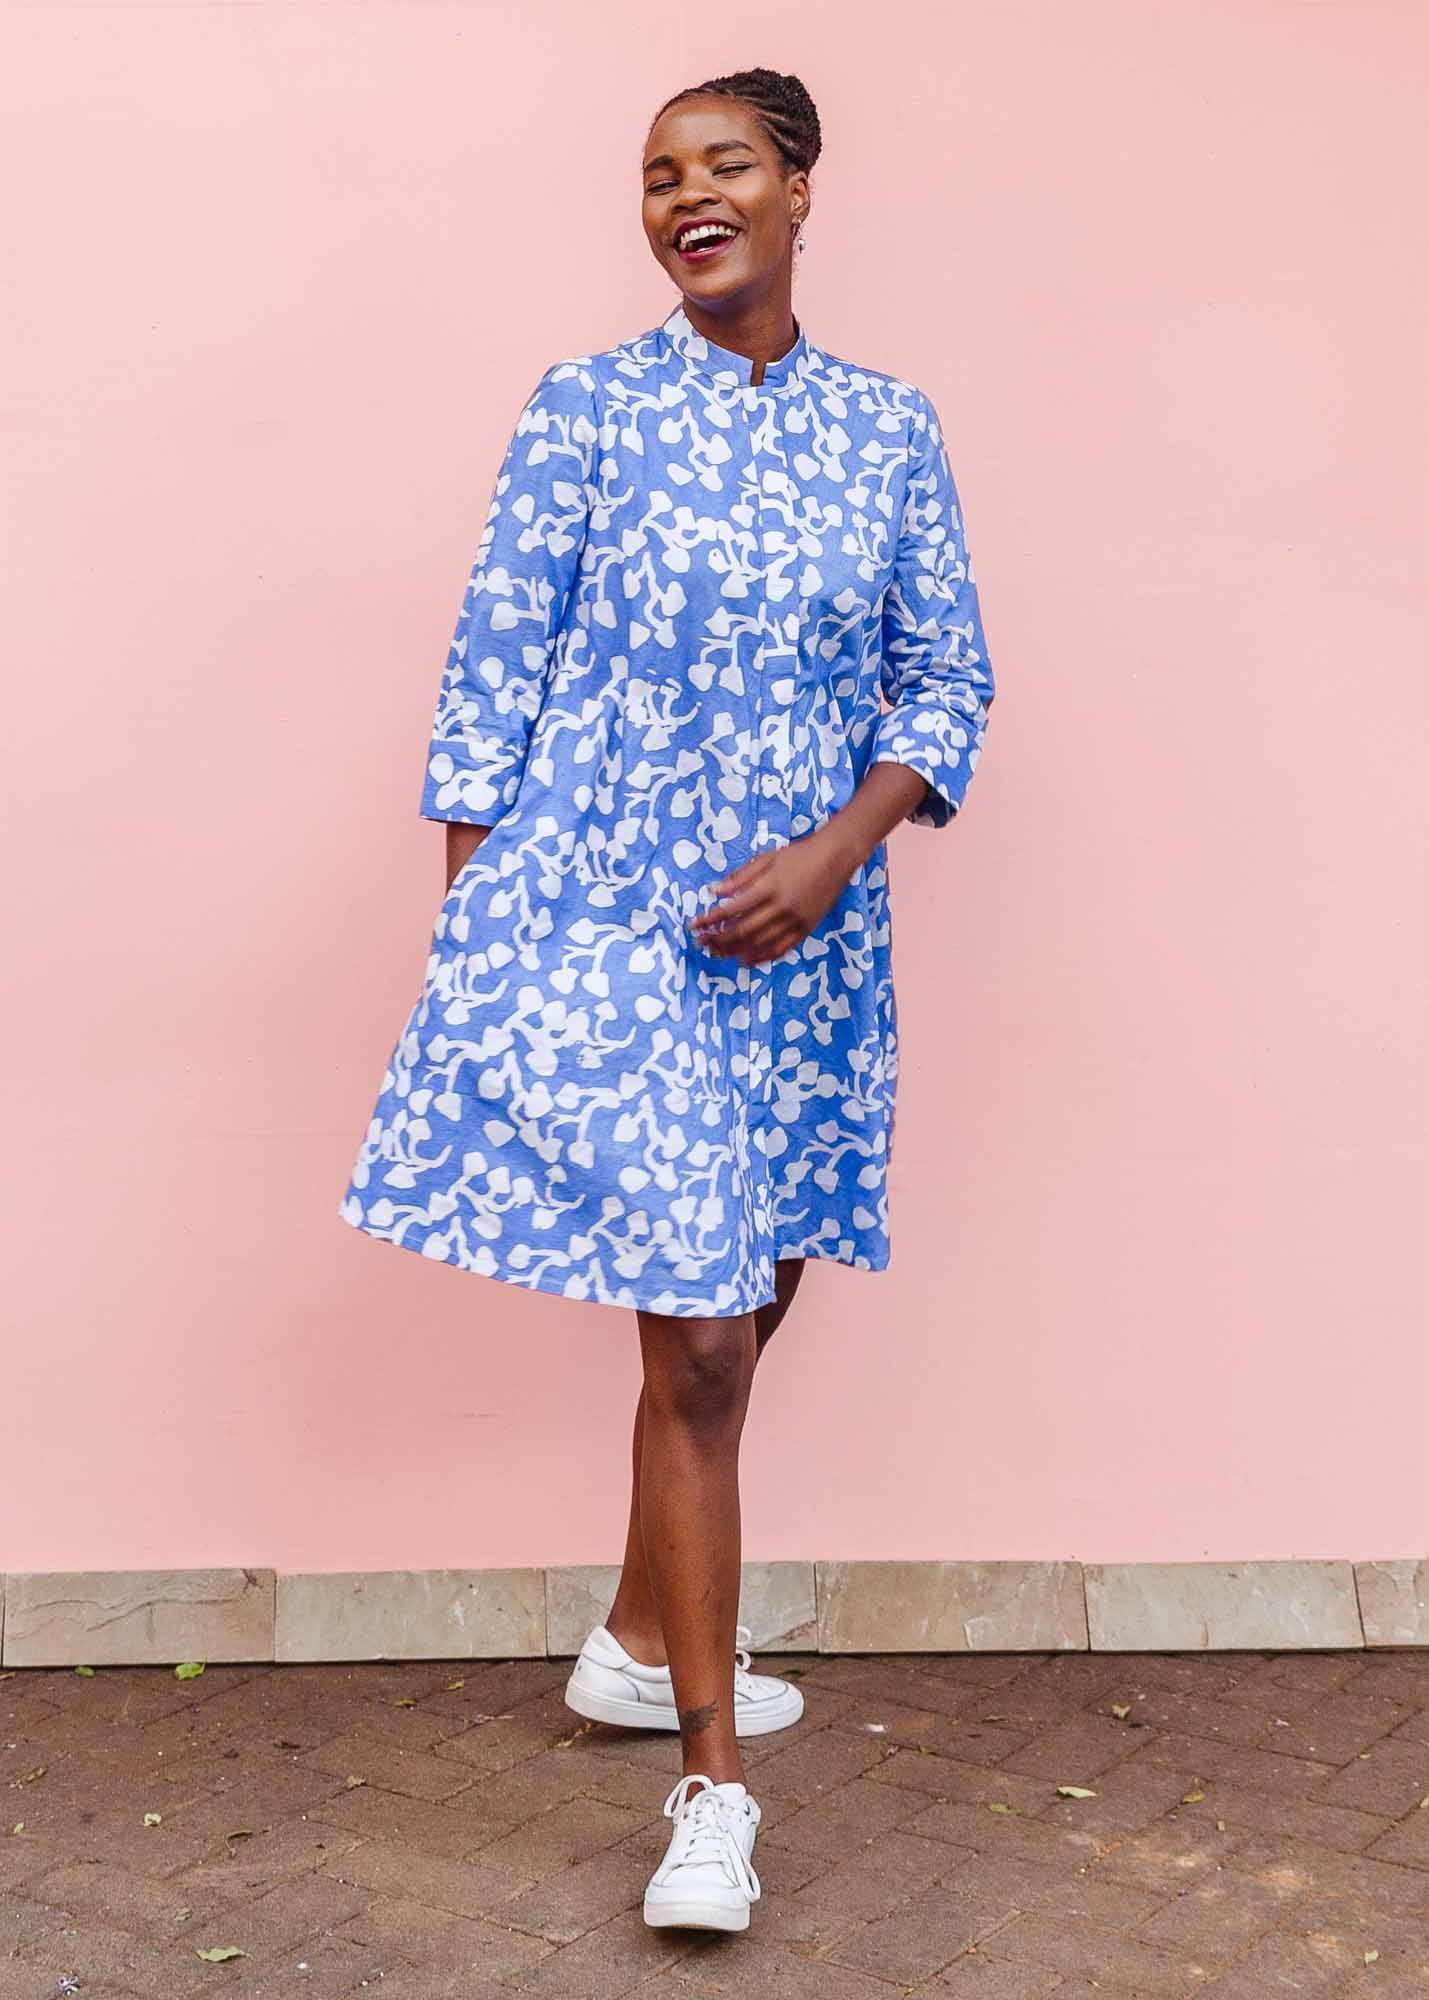 The model is wearing blue and white leaf print dress